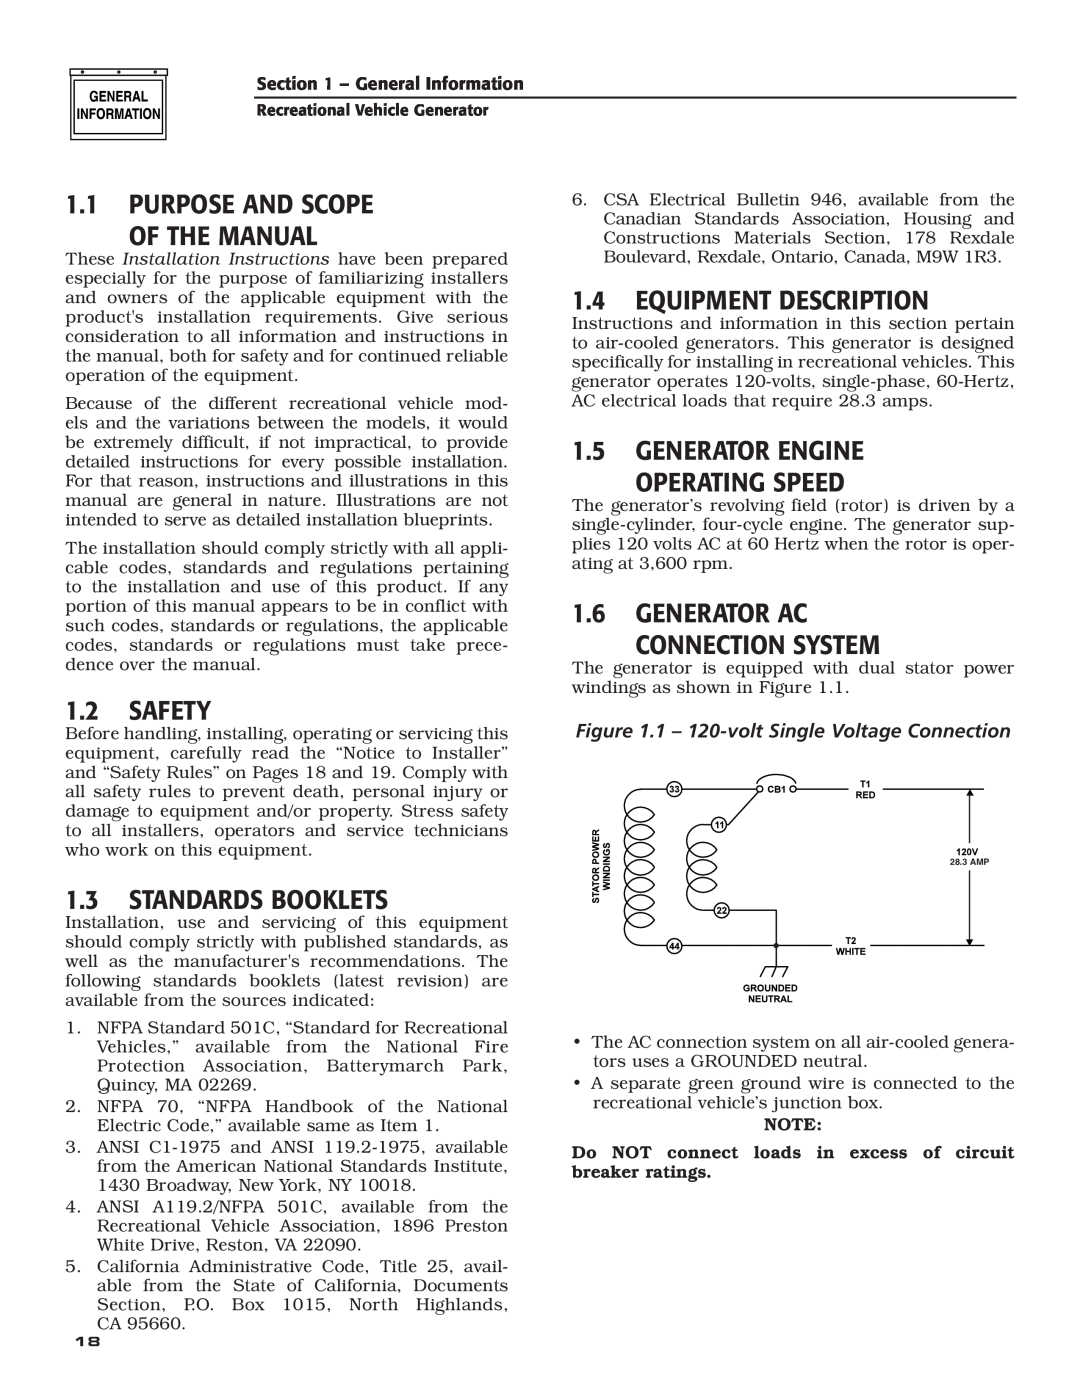 Guardian Technologies 004701-0 owner manual 1.1PURPOSE AND SCOPE OF the MANUAL, 1.2SAFETY, 1.4EQUIPMENT DESCRIPTION 